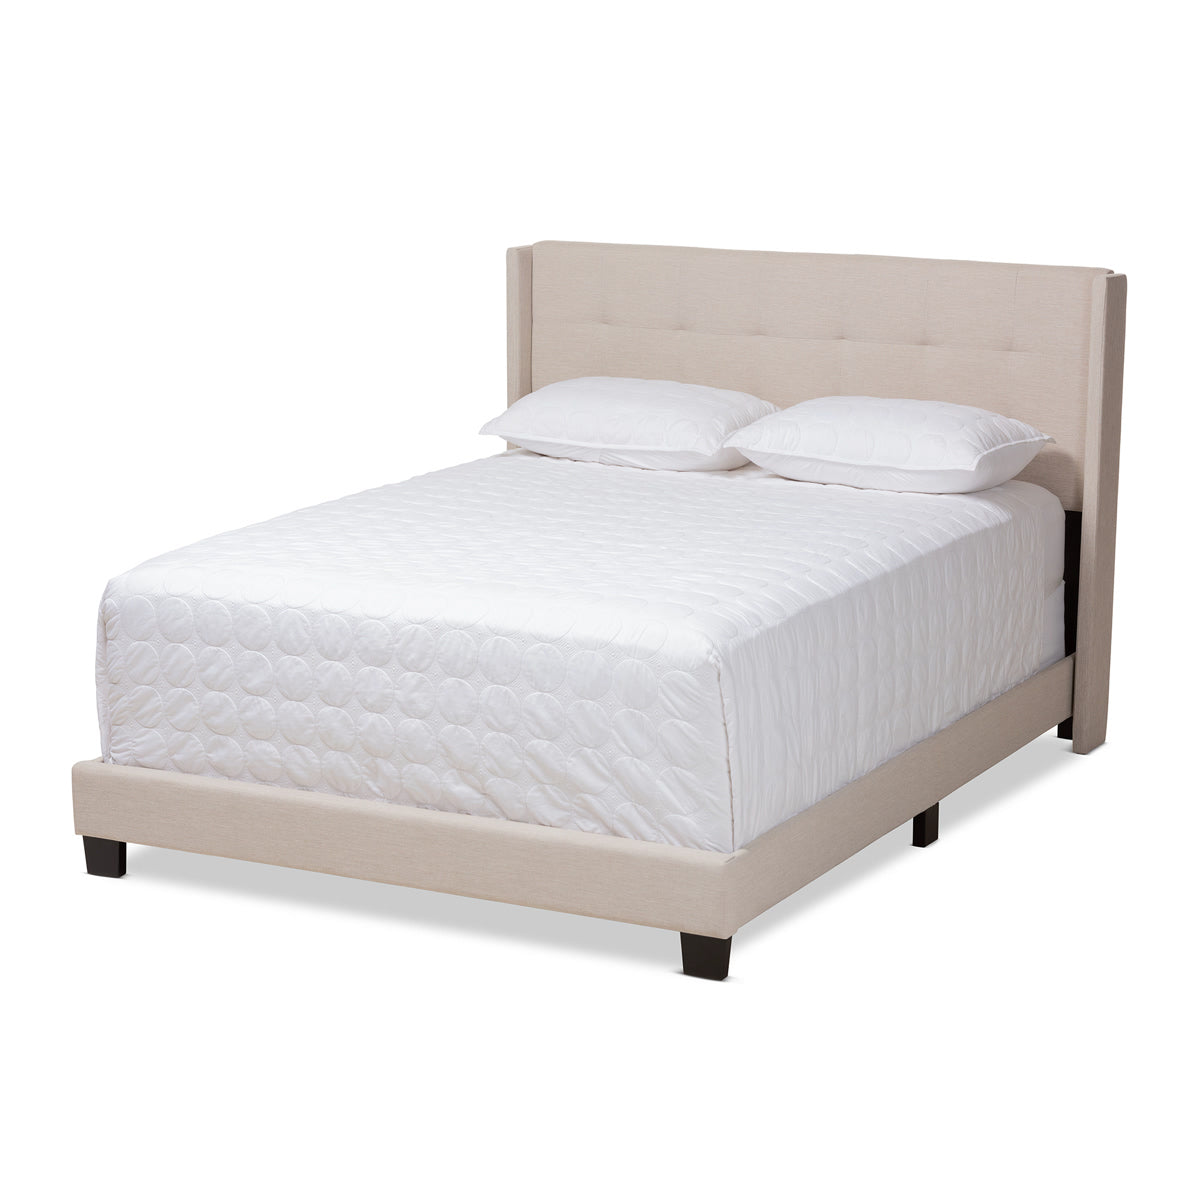 Baxton Studio Lisette Modern and Contemporary Beige Fabric Upholstered King Size Bed Baxton Studio-0-Minimal And Modern - 1